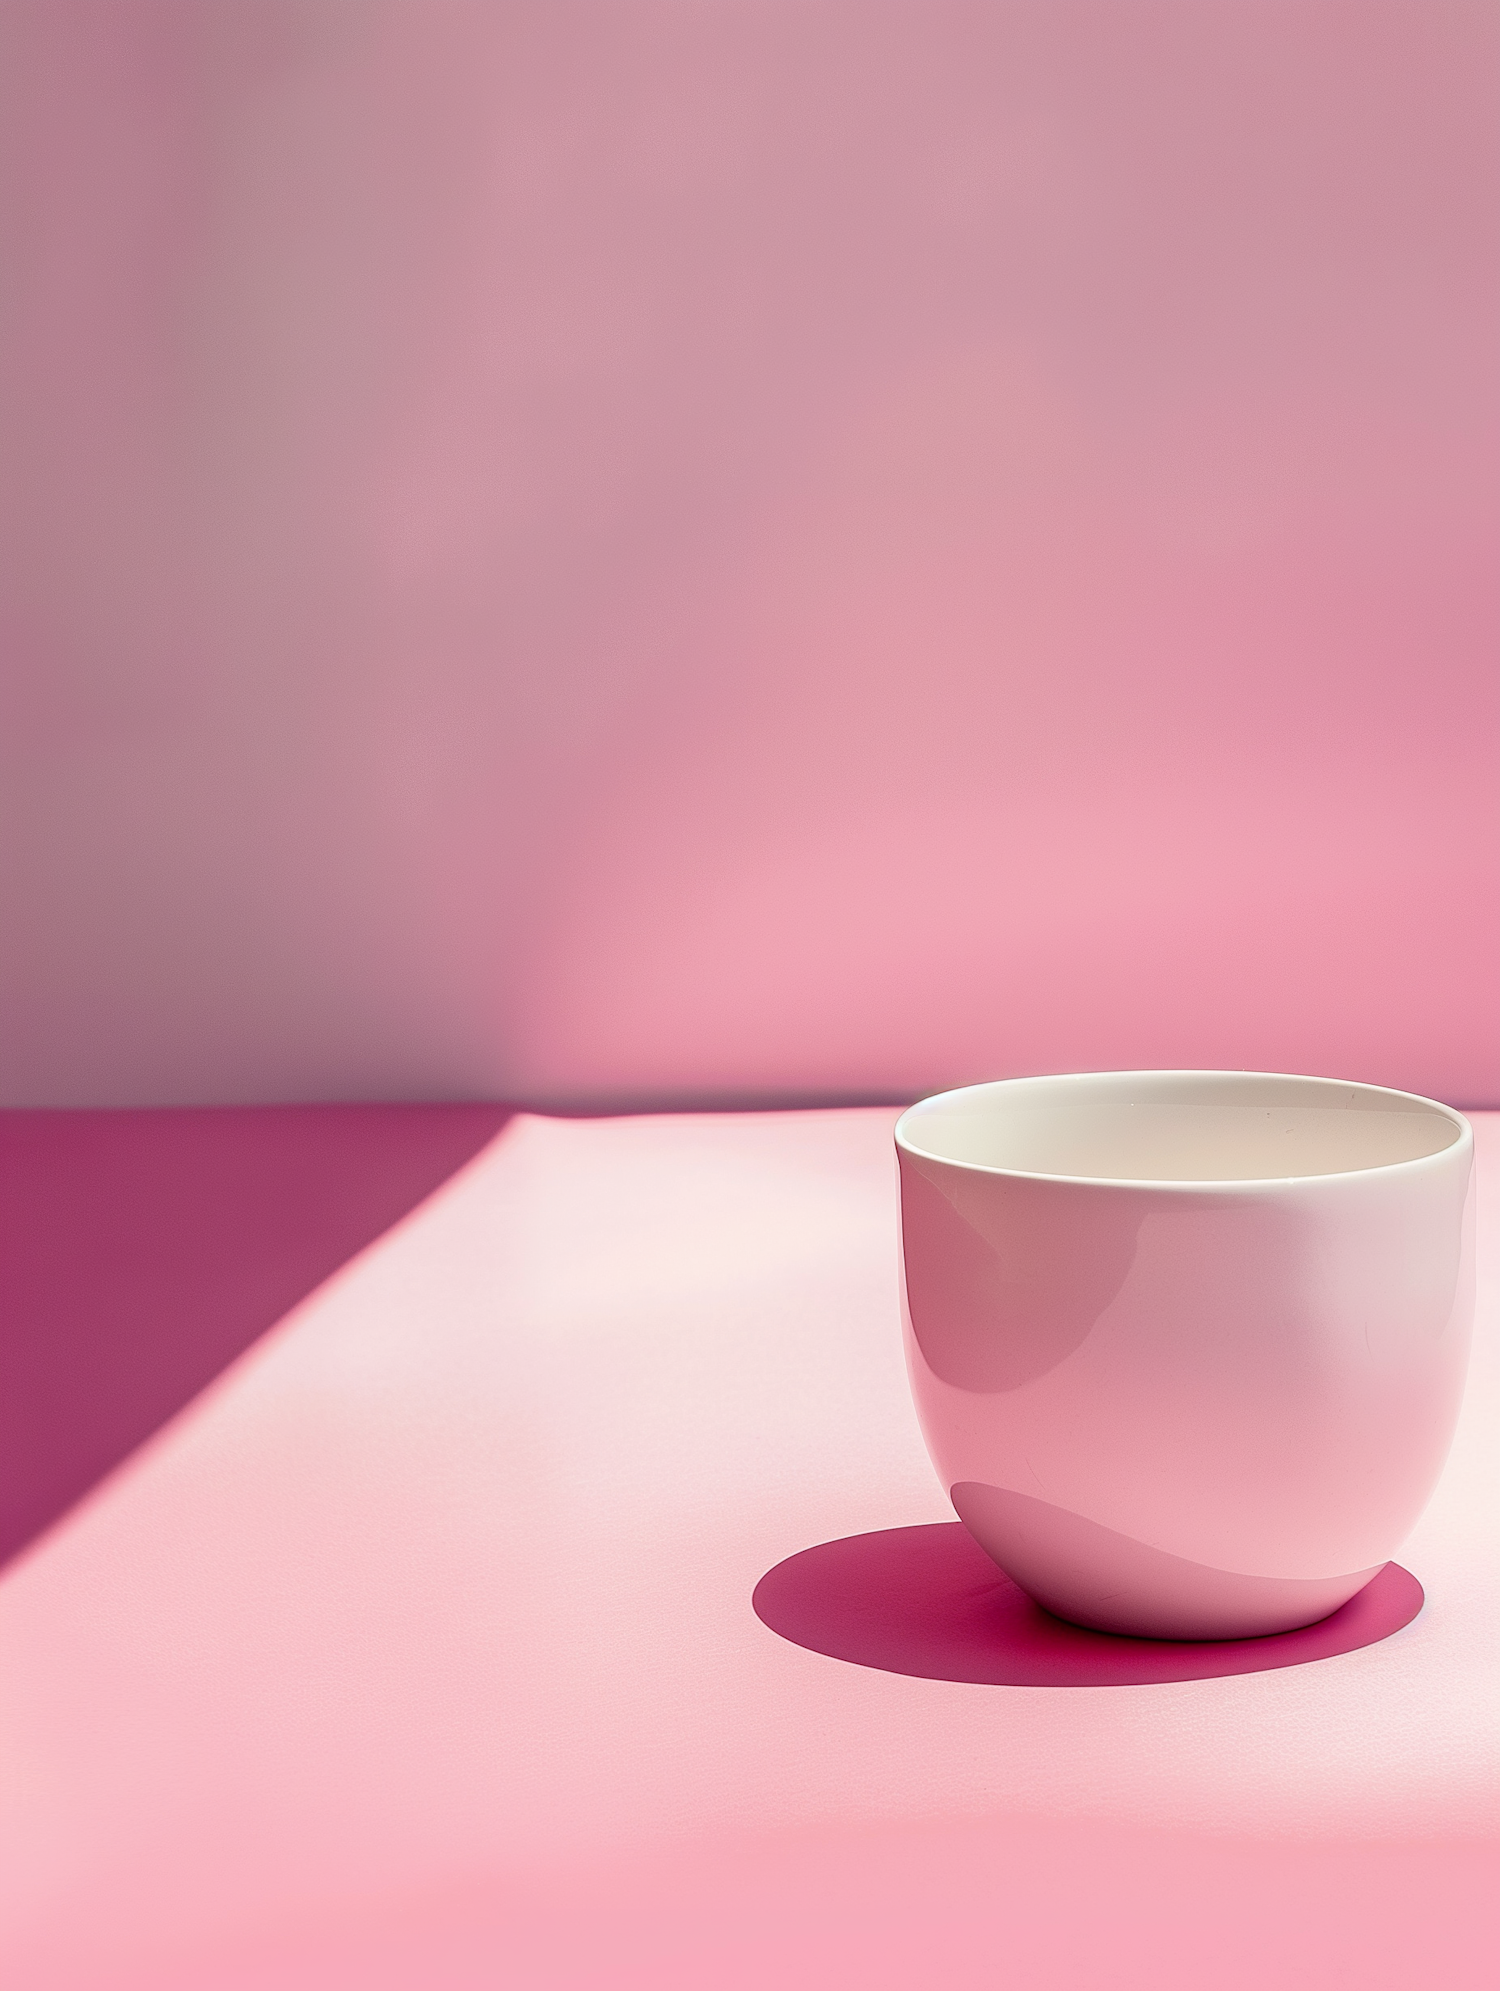 Minimalistic White Ceramic Cup on Pink